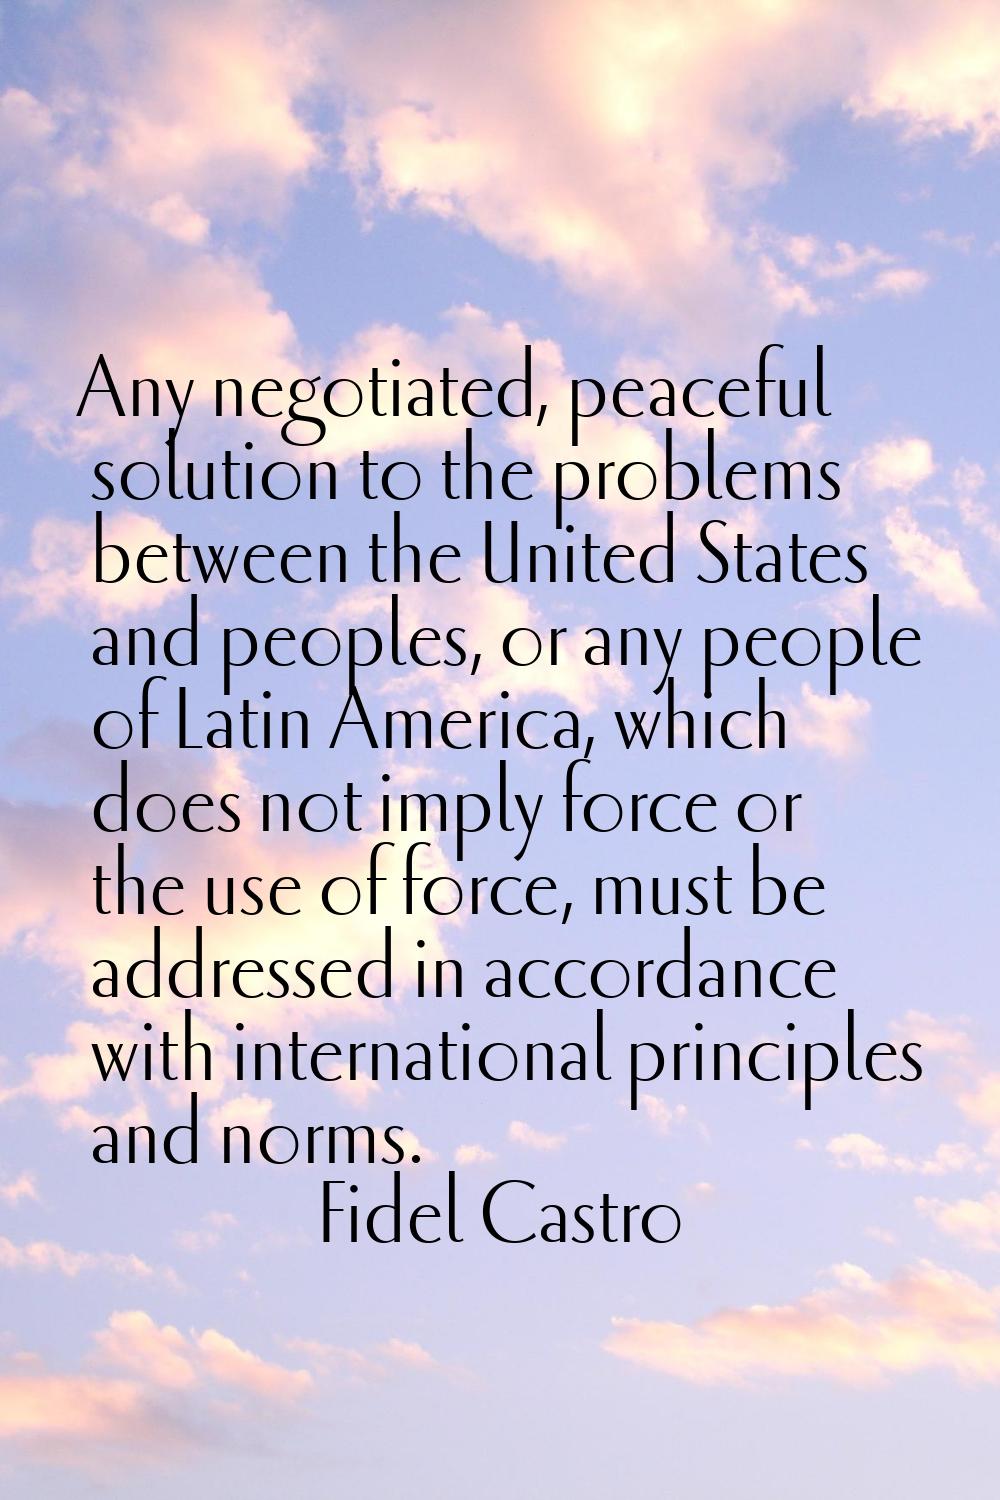 Any negotiated, peaceful solution to the problems between the United States and peoples, or any peo